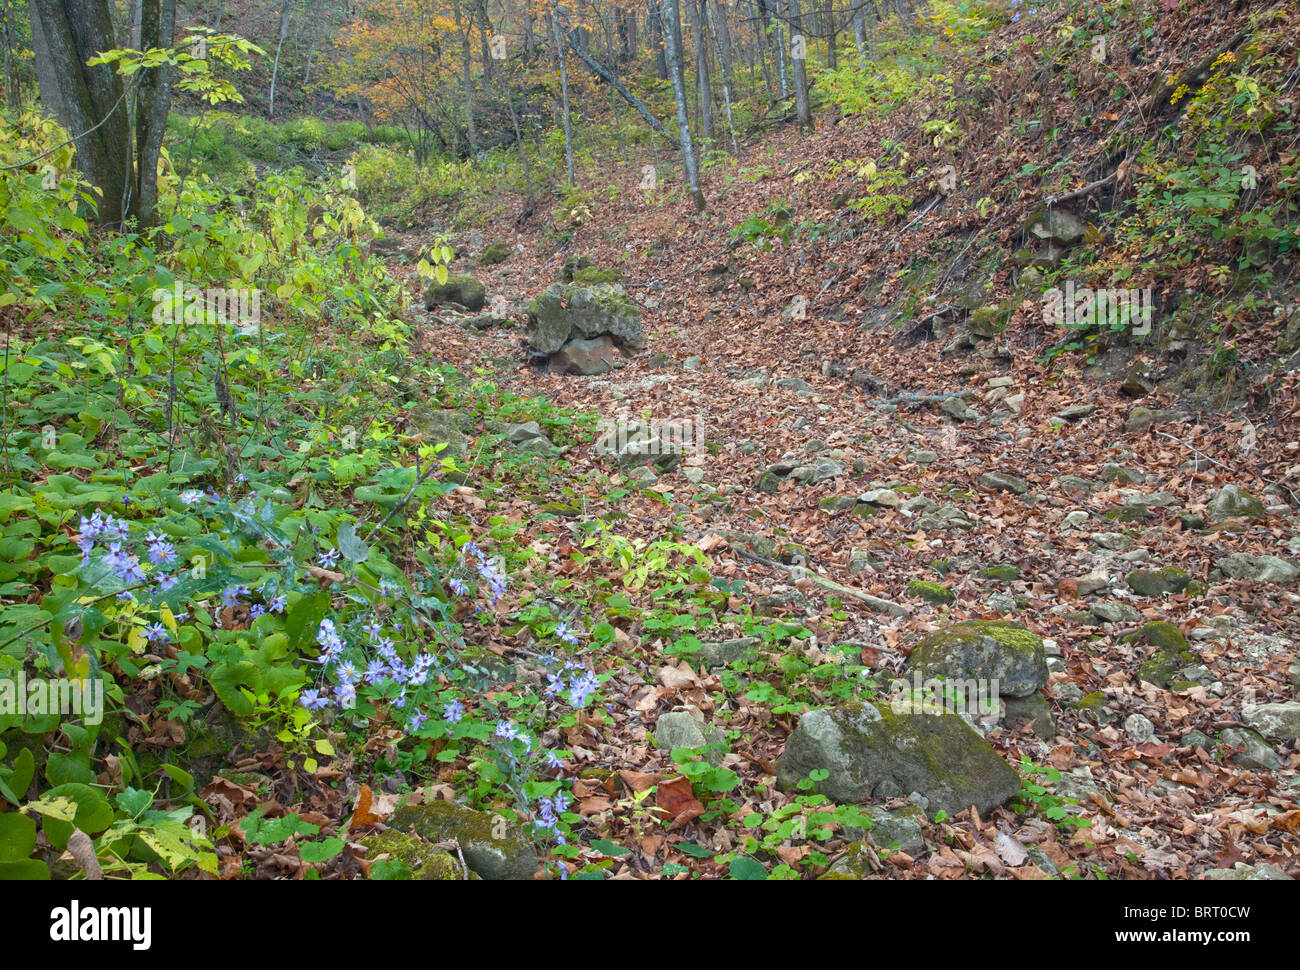 Dry Creek Paint Creek Unit, Yellow River State Forest, Allamakee County, Iowa Stockfoto